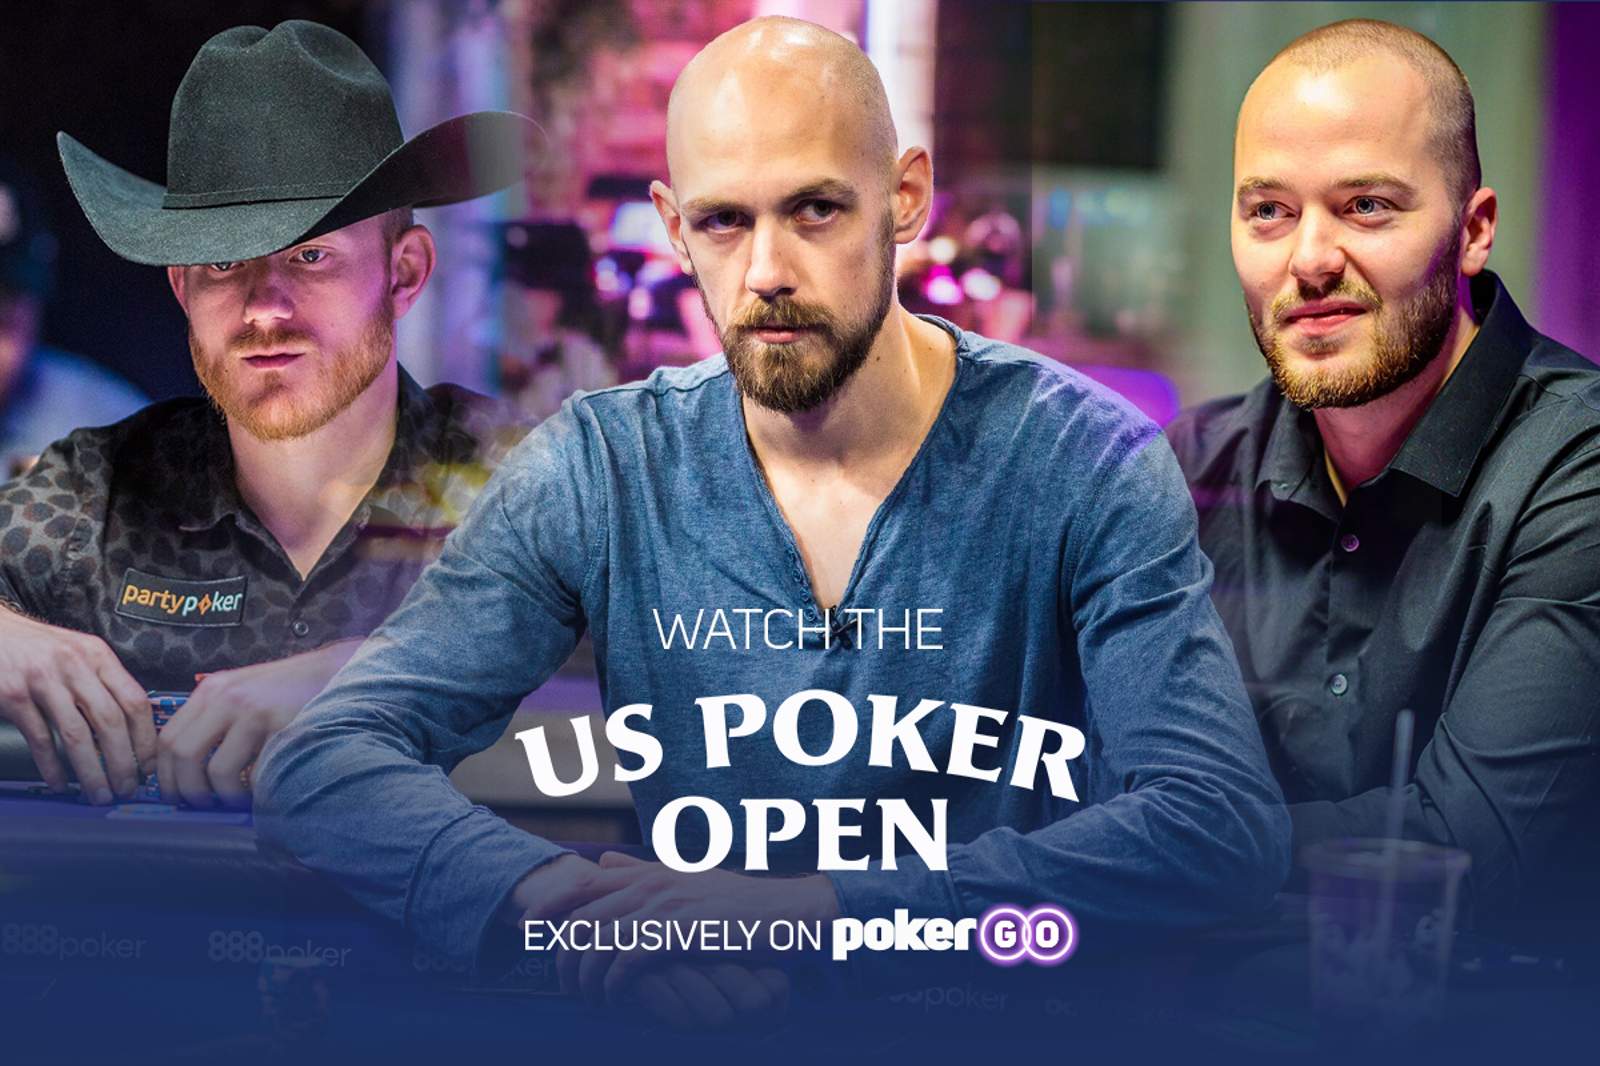 Now Available on PokerGO: The 2018 U.S. Poker Open On-Demand